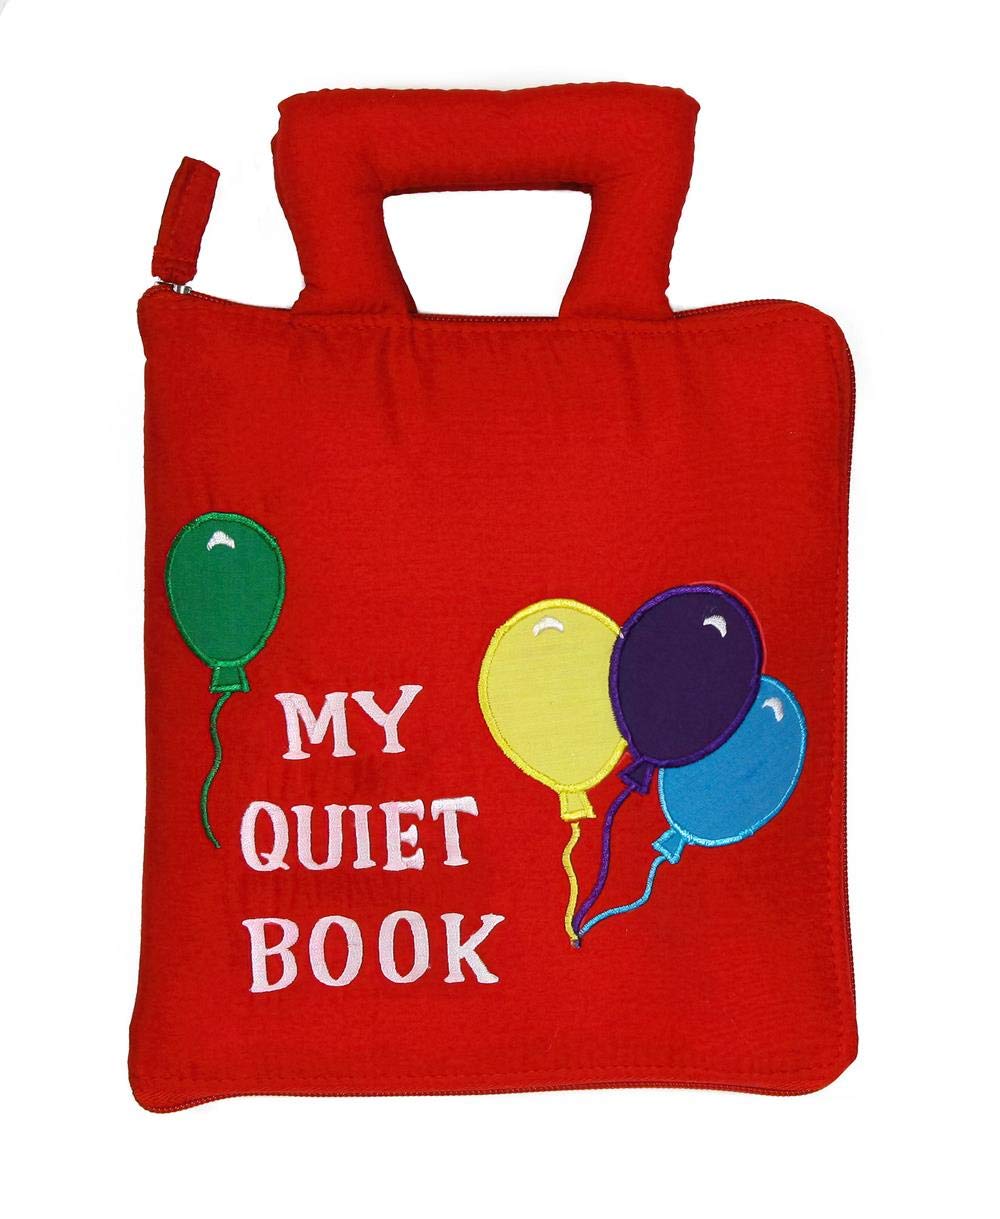 My Quiet Book by Pockets of Learning 